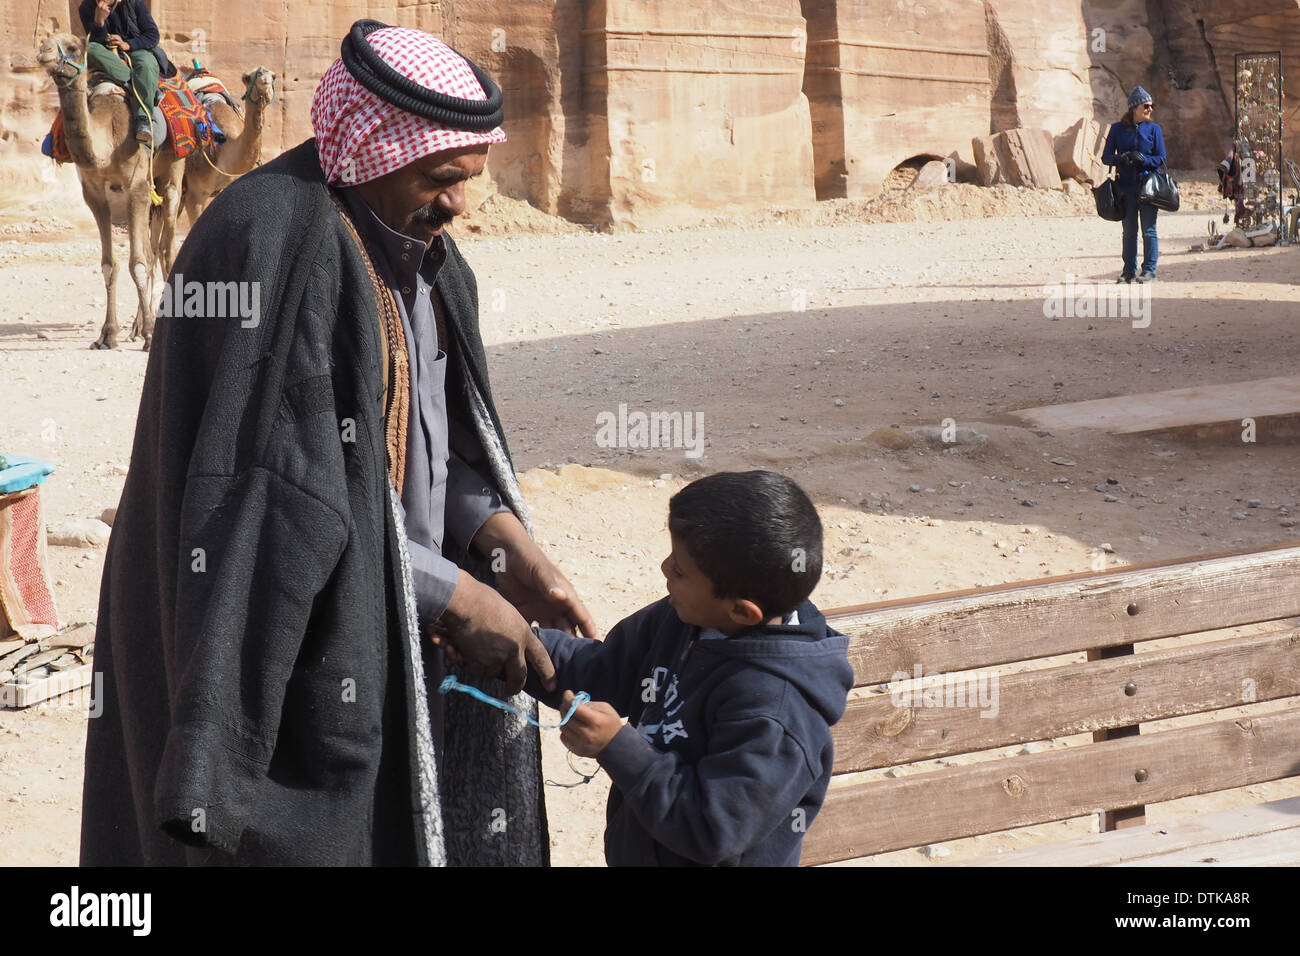 Bedouin man shaking hands with a child at Petra a UNESCO World Heritage Site Stock Photo